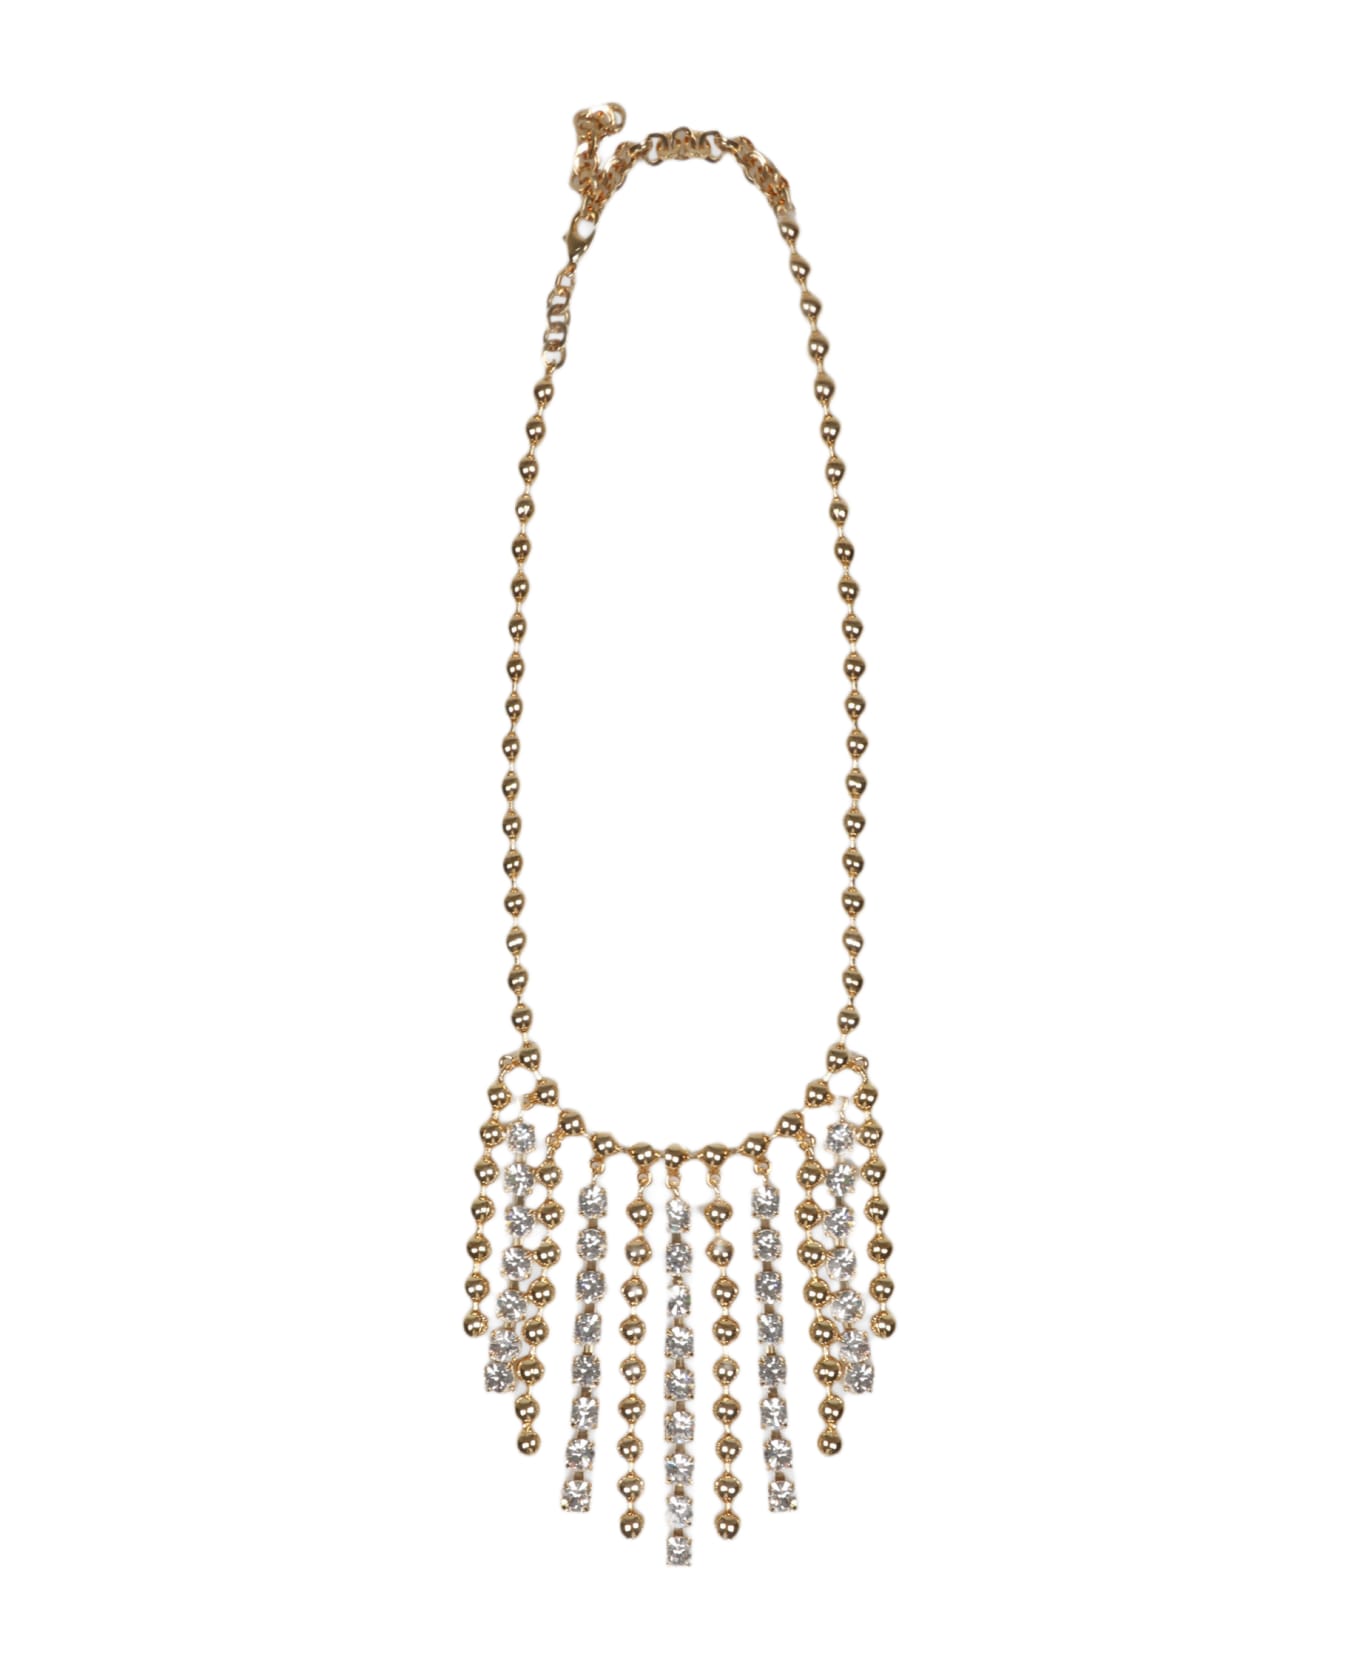 Alessandra Rich Crystal And Chain Fringes Necklace - Metallic